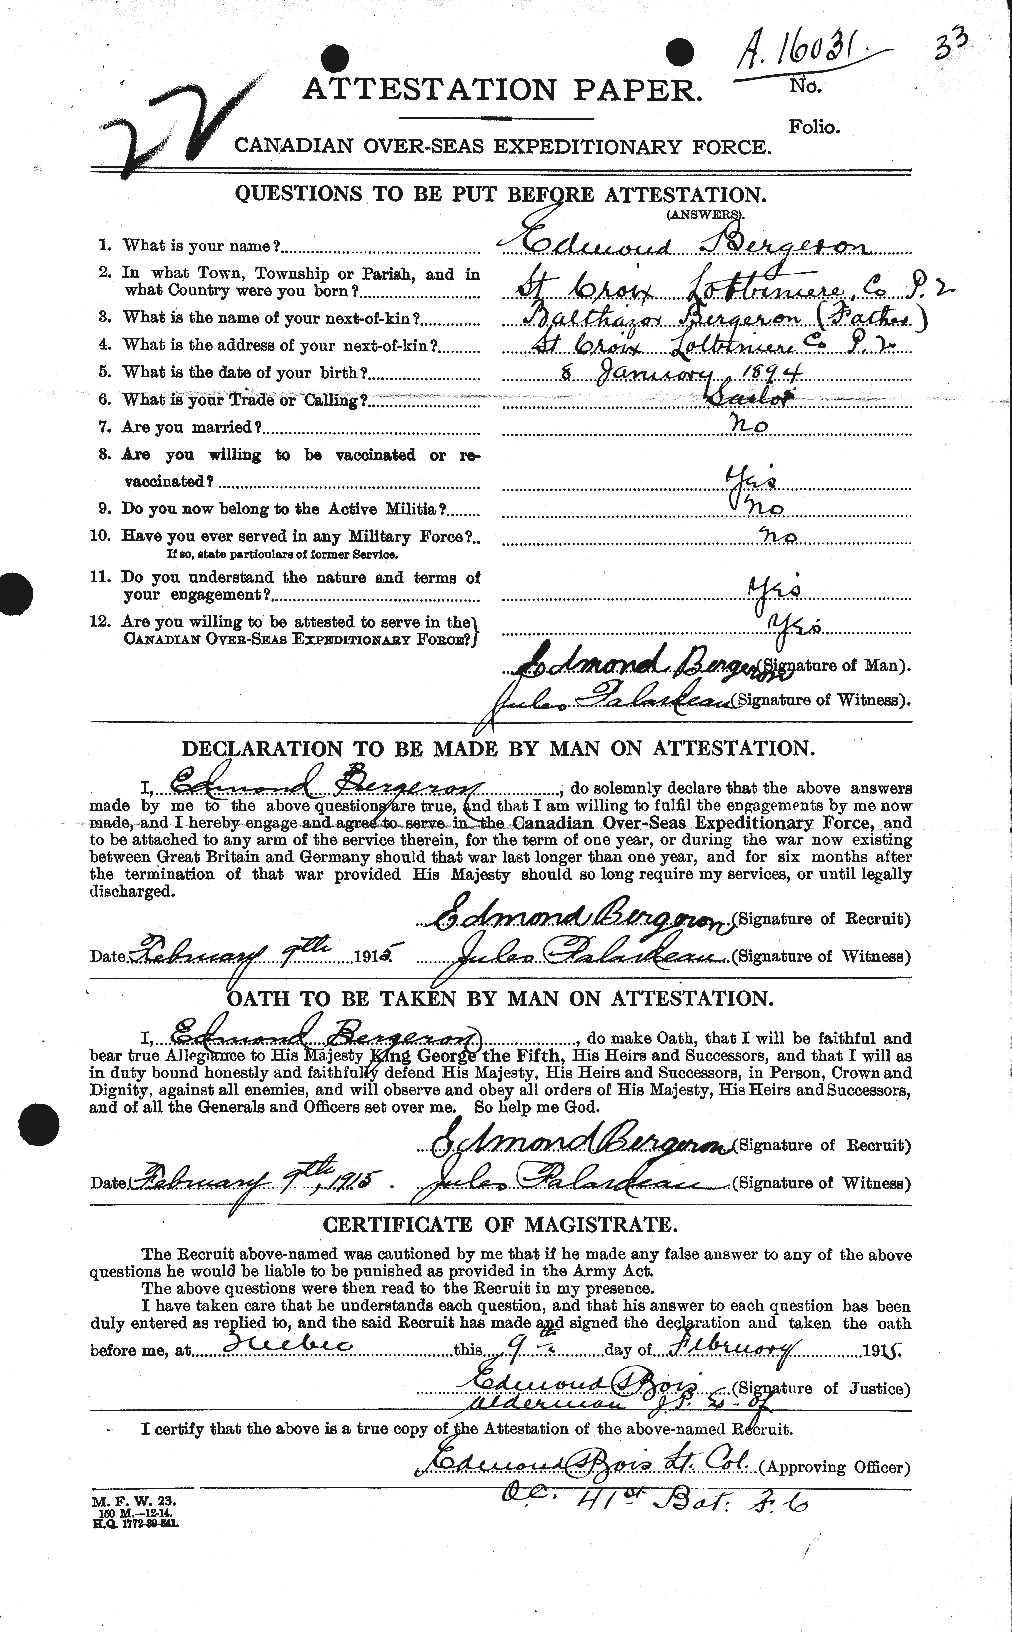 Personnel Records of the First World War - CEF 233044a